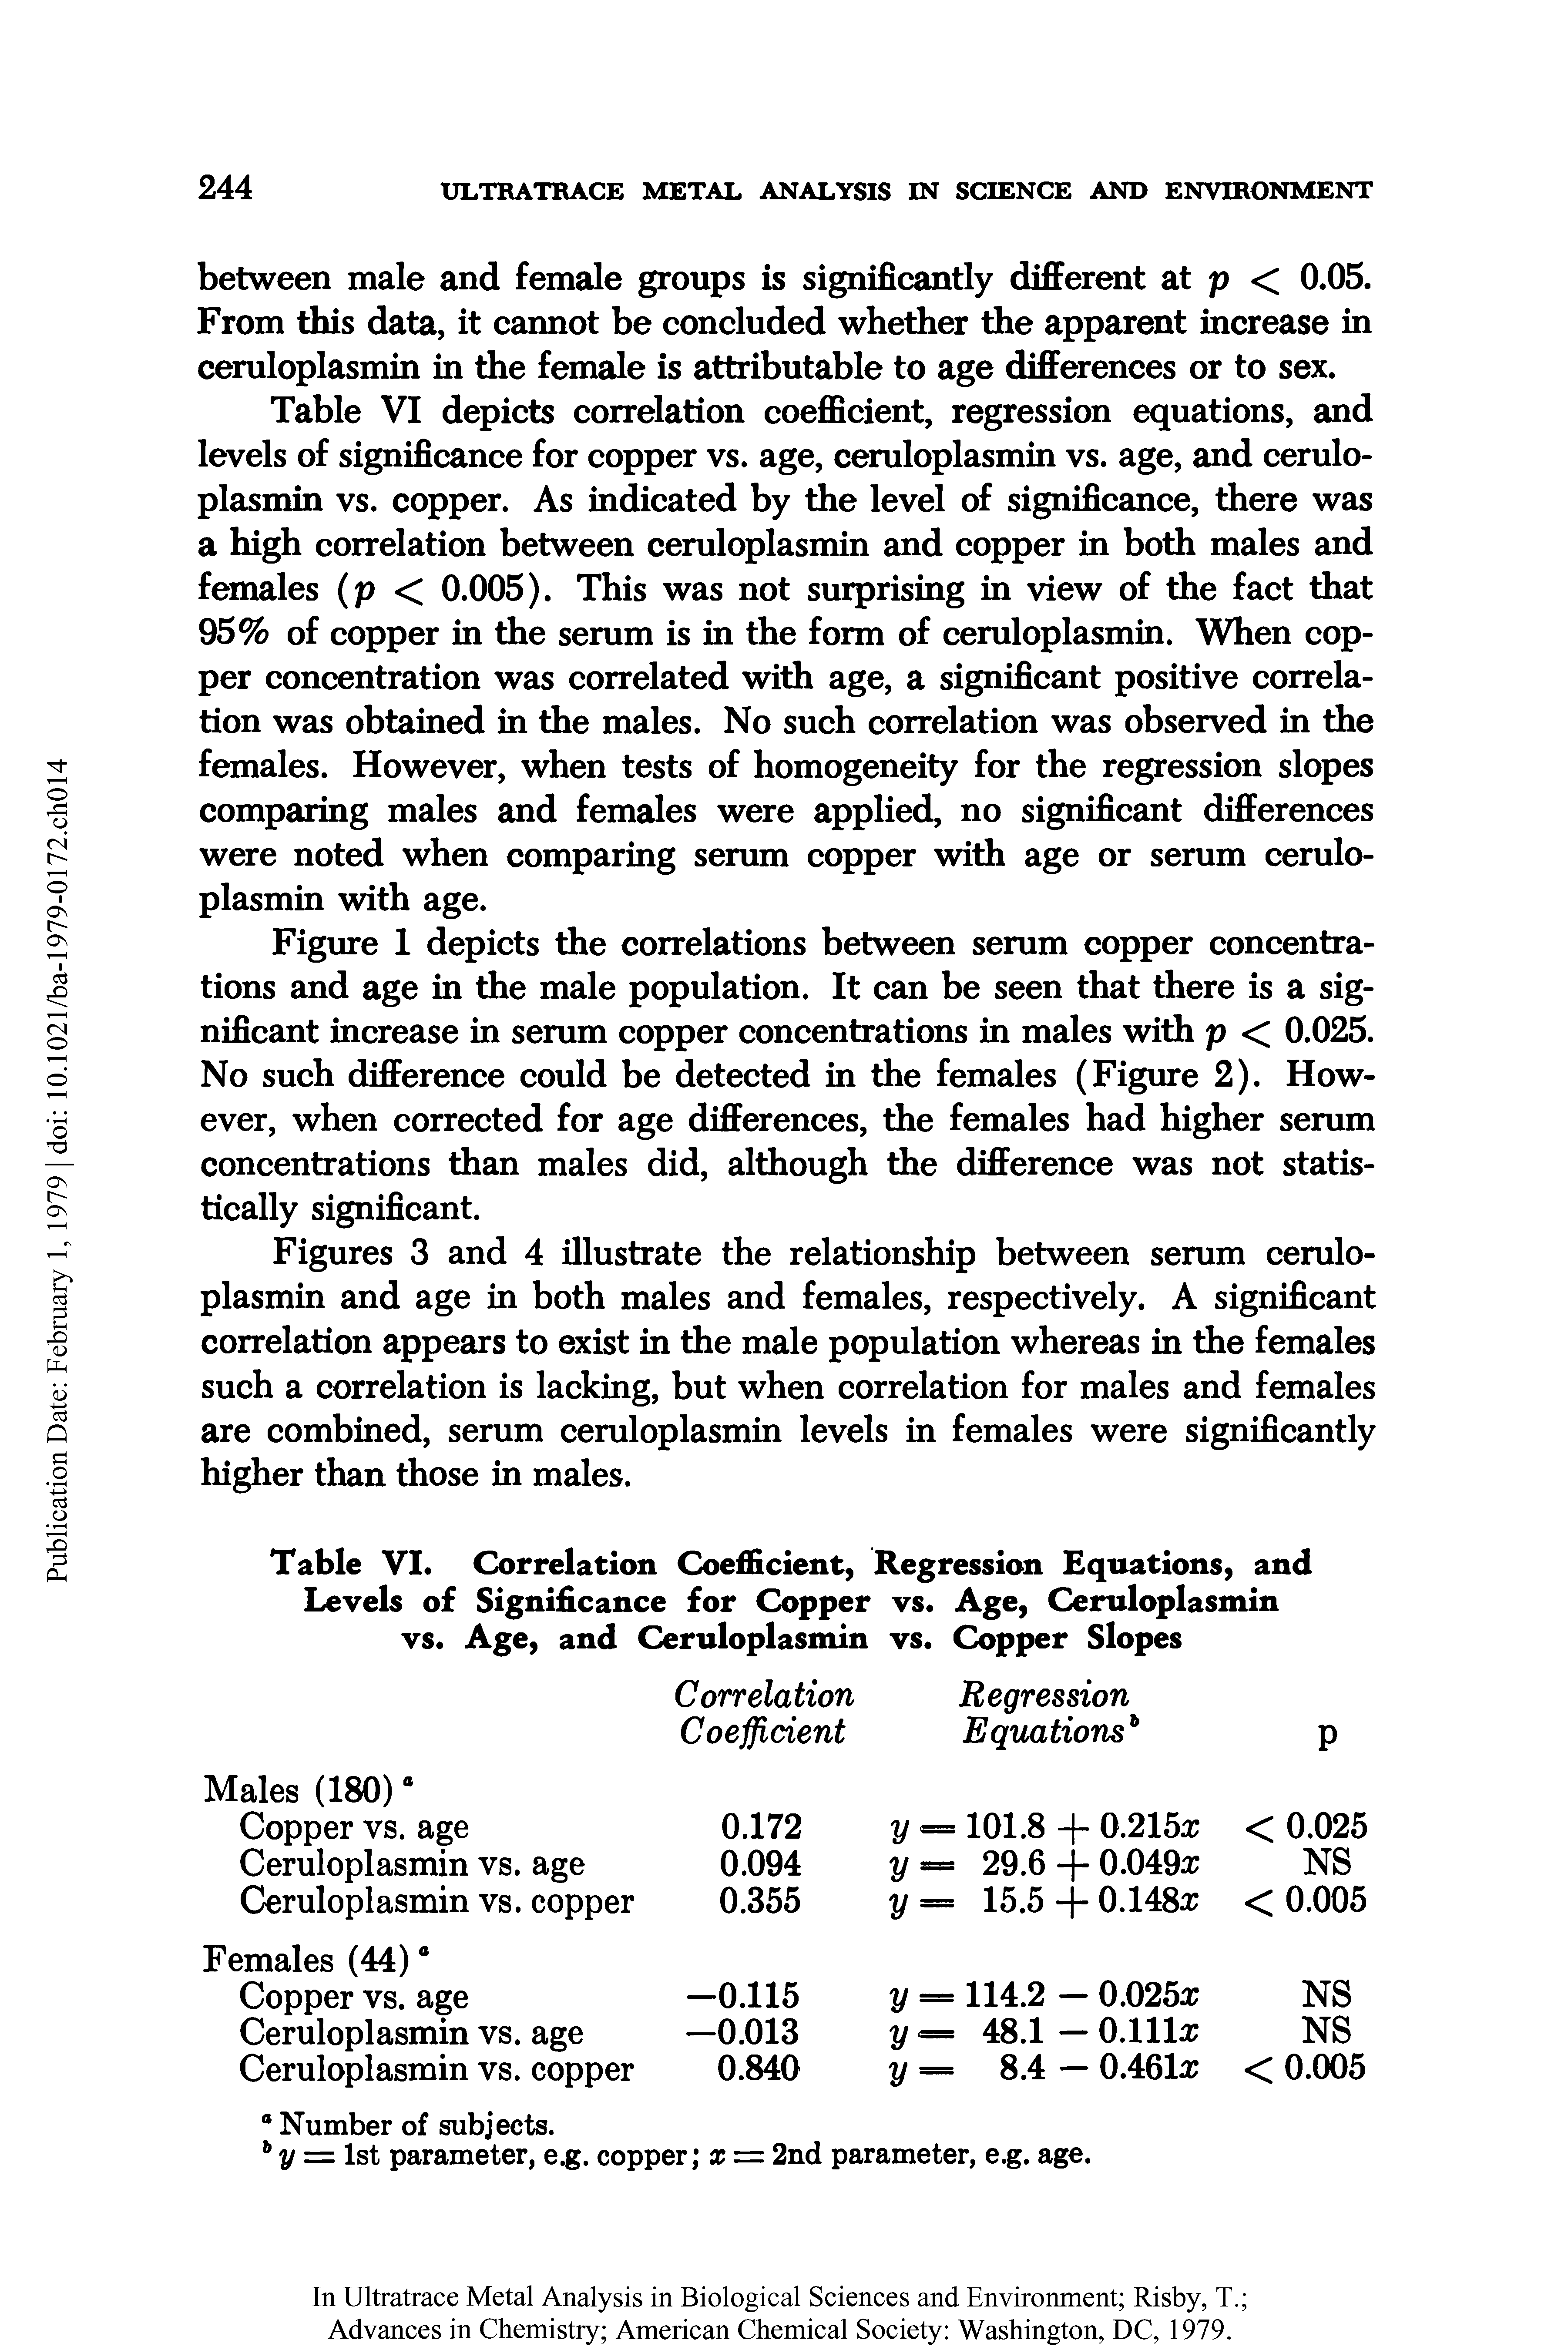 Table VI depicts correlation coeflBcient, regression equations, and levels of significance for copper vs. age, ceruloplasmin vs. age, and ceruloplasmin vs. copper. As indicated by the level of significance, there was a high correlation between ceruloplasmin and copper in both males and females (p < 0.005). This was not surprising in view of the fact that 95% of copper in the serum is in the form of ceruloplasmin. When copper concentration was correlated with age, a significant positive correlation was obtained in the males. No such correlation was observed in the females. However, when tests of homogeneity for the regression slopes comparing males and females were applied, no significant differences were noted when comparing serum copper with age or serum ceruloplasmin with age.